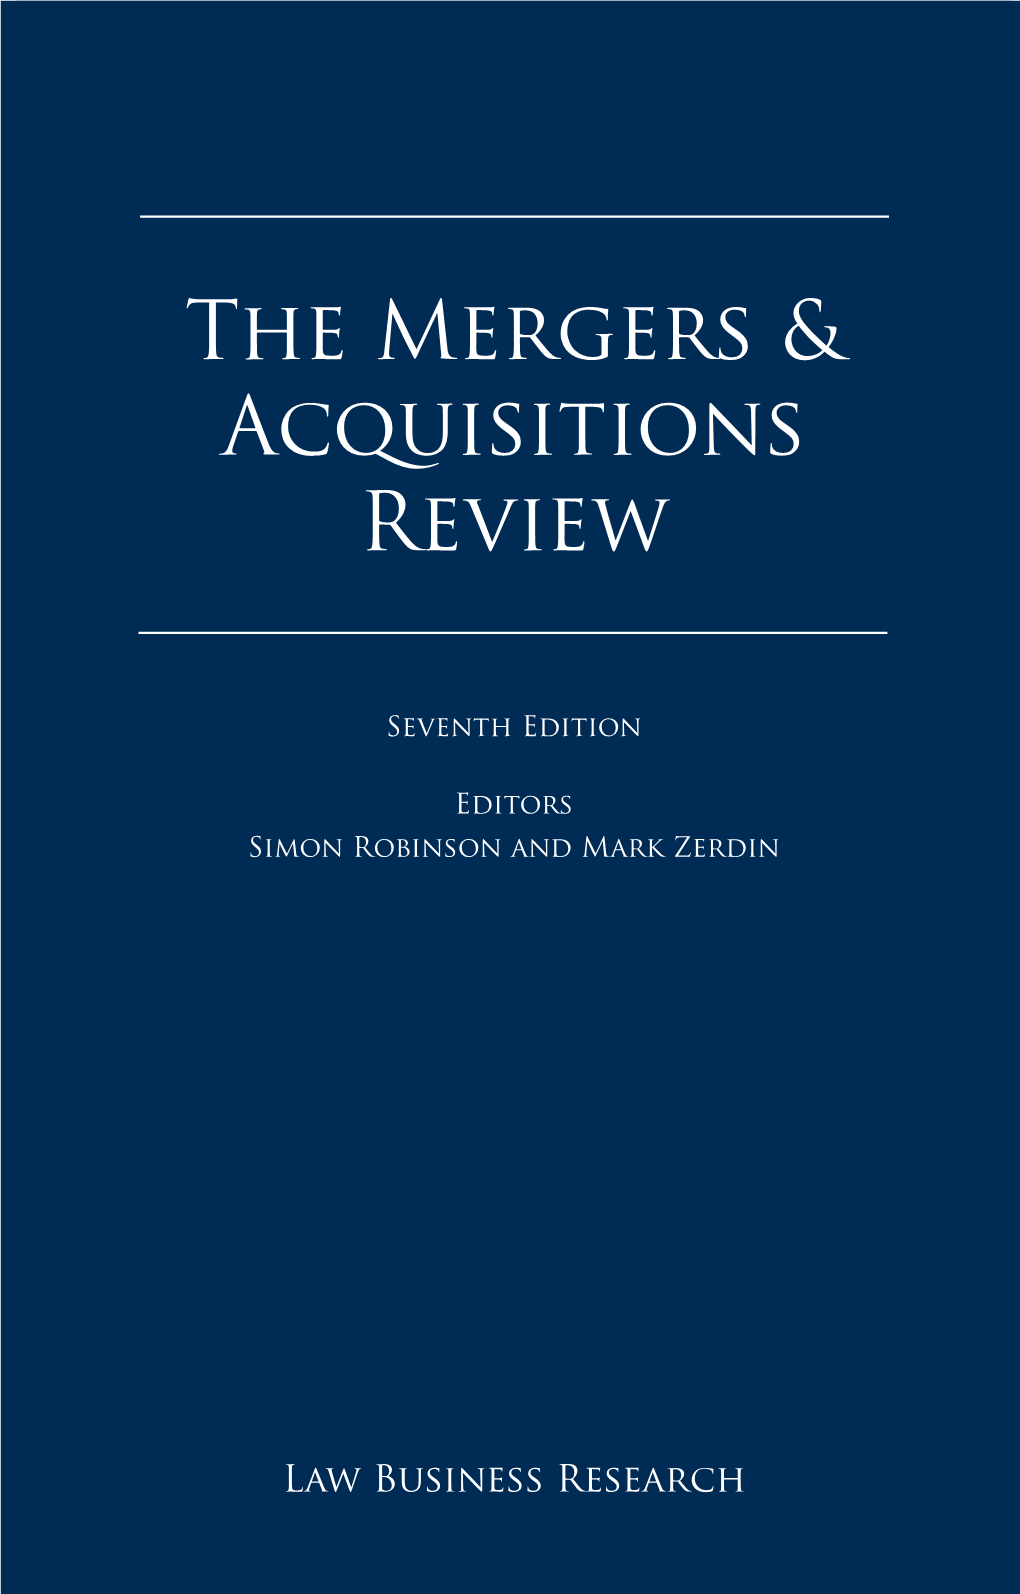 The Mergers & Acquisitions Review